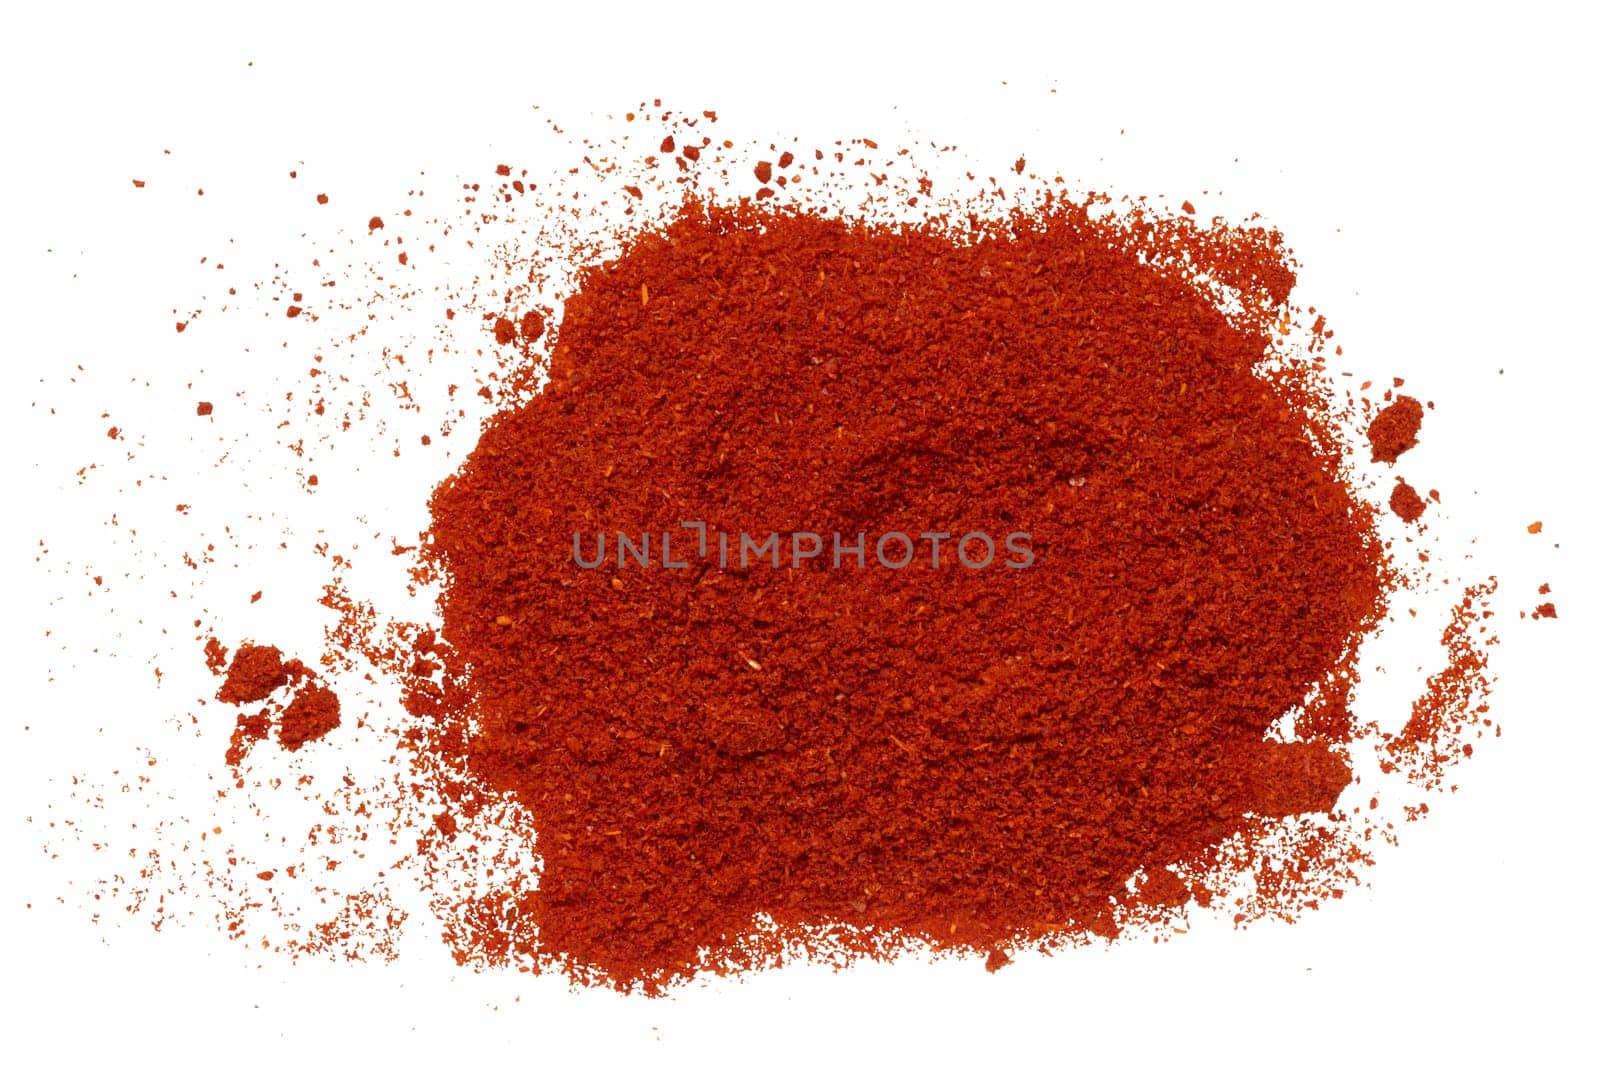 Scattered pile of smoked ground red paprika by ndanko